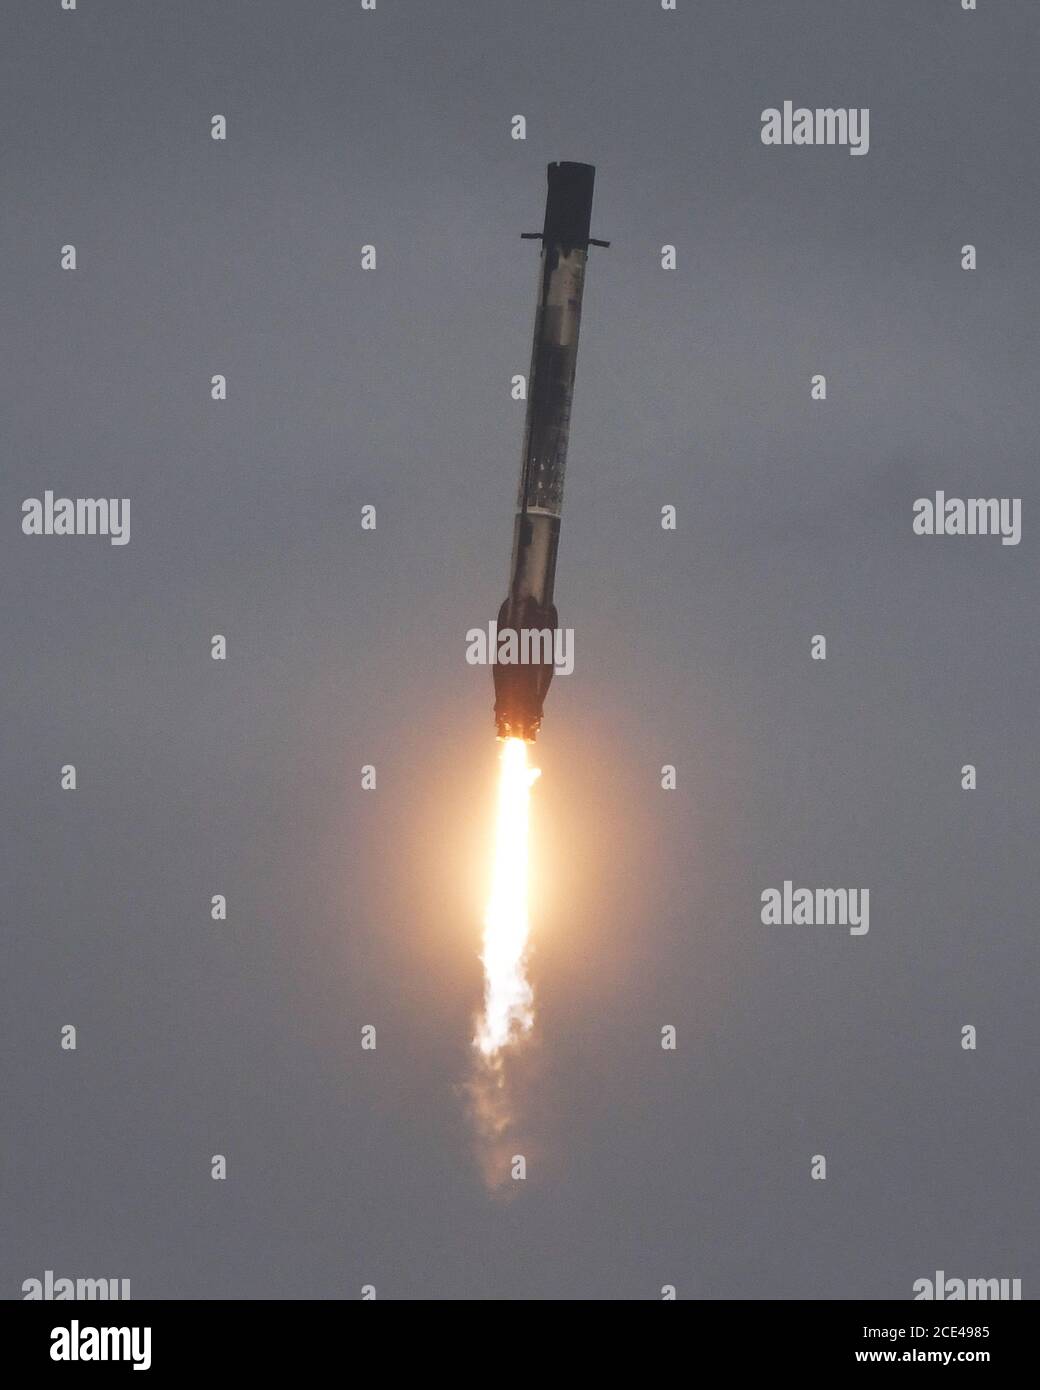 Cape Canaveral, Florida, USA. 30th Aug, 2020. The first stage of a SpaceX Falcon 9 rocket returns to Landing Zone 1 at 7:27 PM after launching from Complex 40 at the Cape Canaveral Air Force Station, Florida on Sunday, August 30, 2020. Photo by Joe Marino/UPI Credit: UPI/Alamy Live News Credit: UPI/Alamy Live News Stock Photo